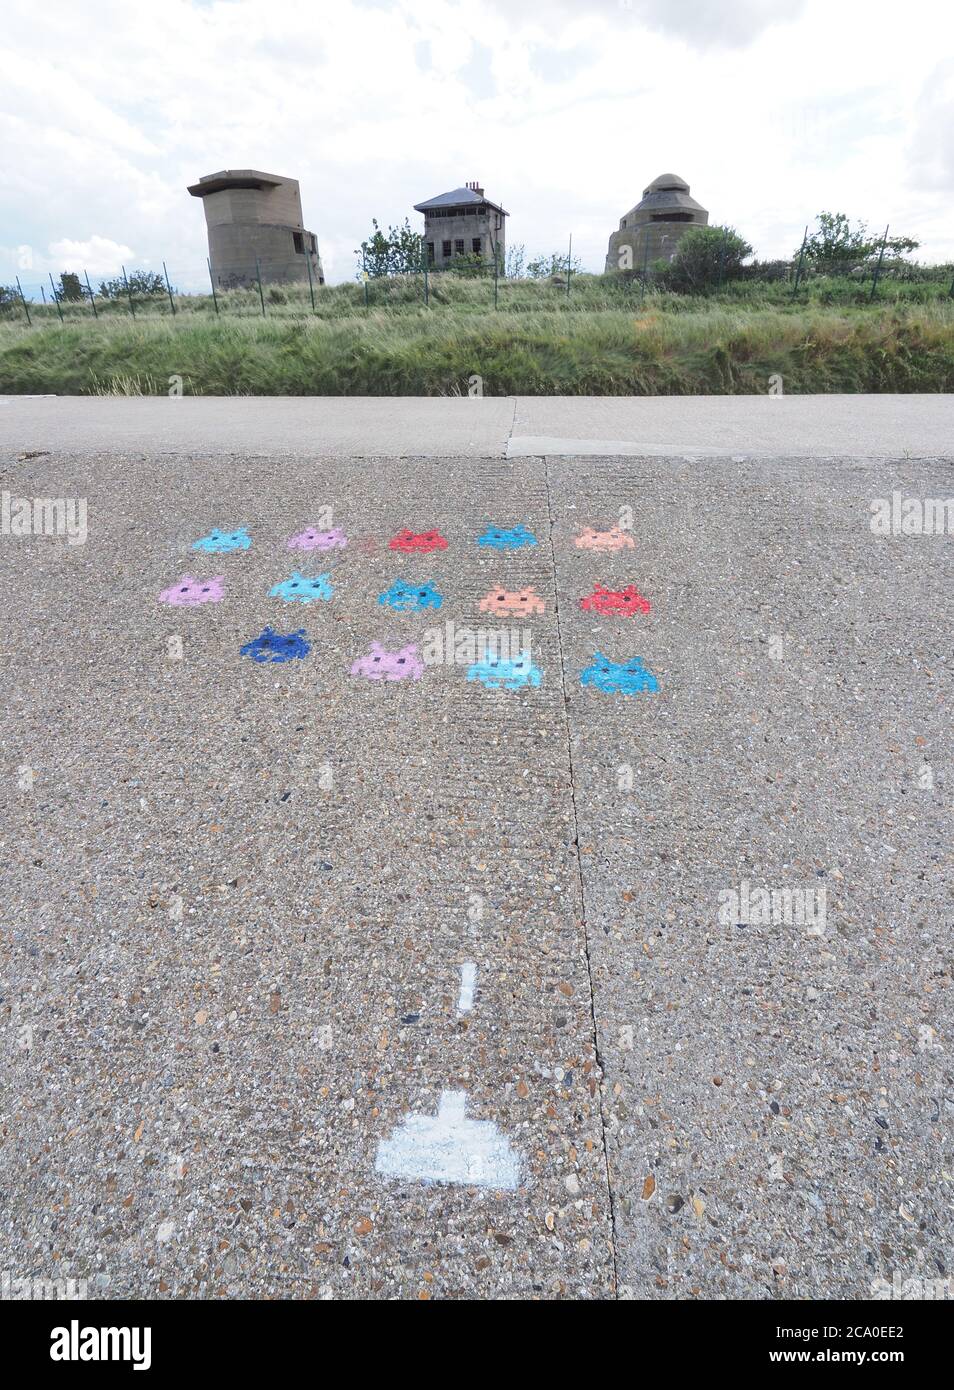 Sheerness, Kent, UK. 3rd August, 2020. A depiction of classic late '70's / 1980s computer game 'Space Invaders' has appeared on the sea wall at Sheerness, Kent in front of three old defensive gun towers. Credit: James Bell/Alamy Live News Stock Photo